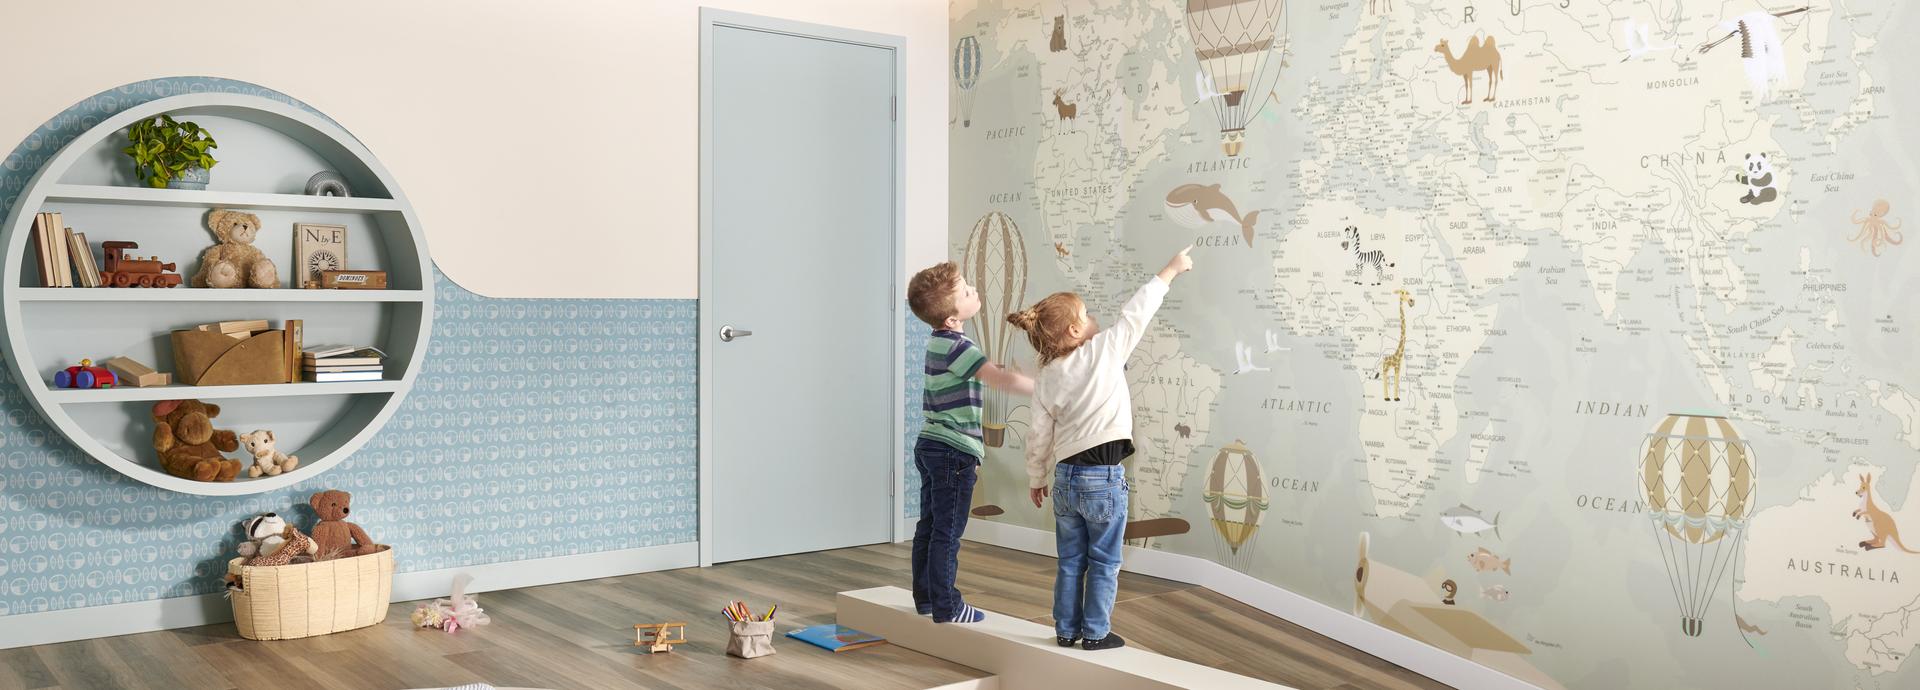 Acrovyn Wall Covering Children Playroom Set